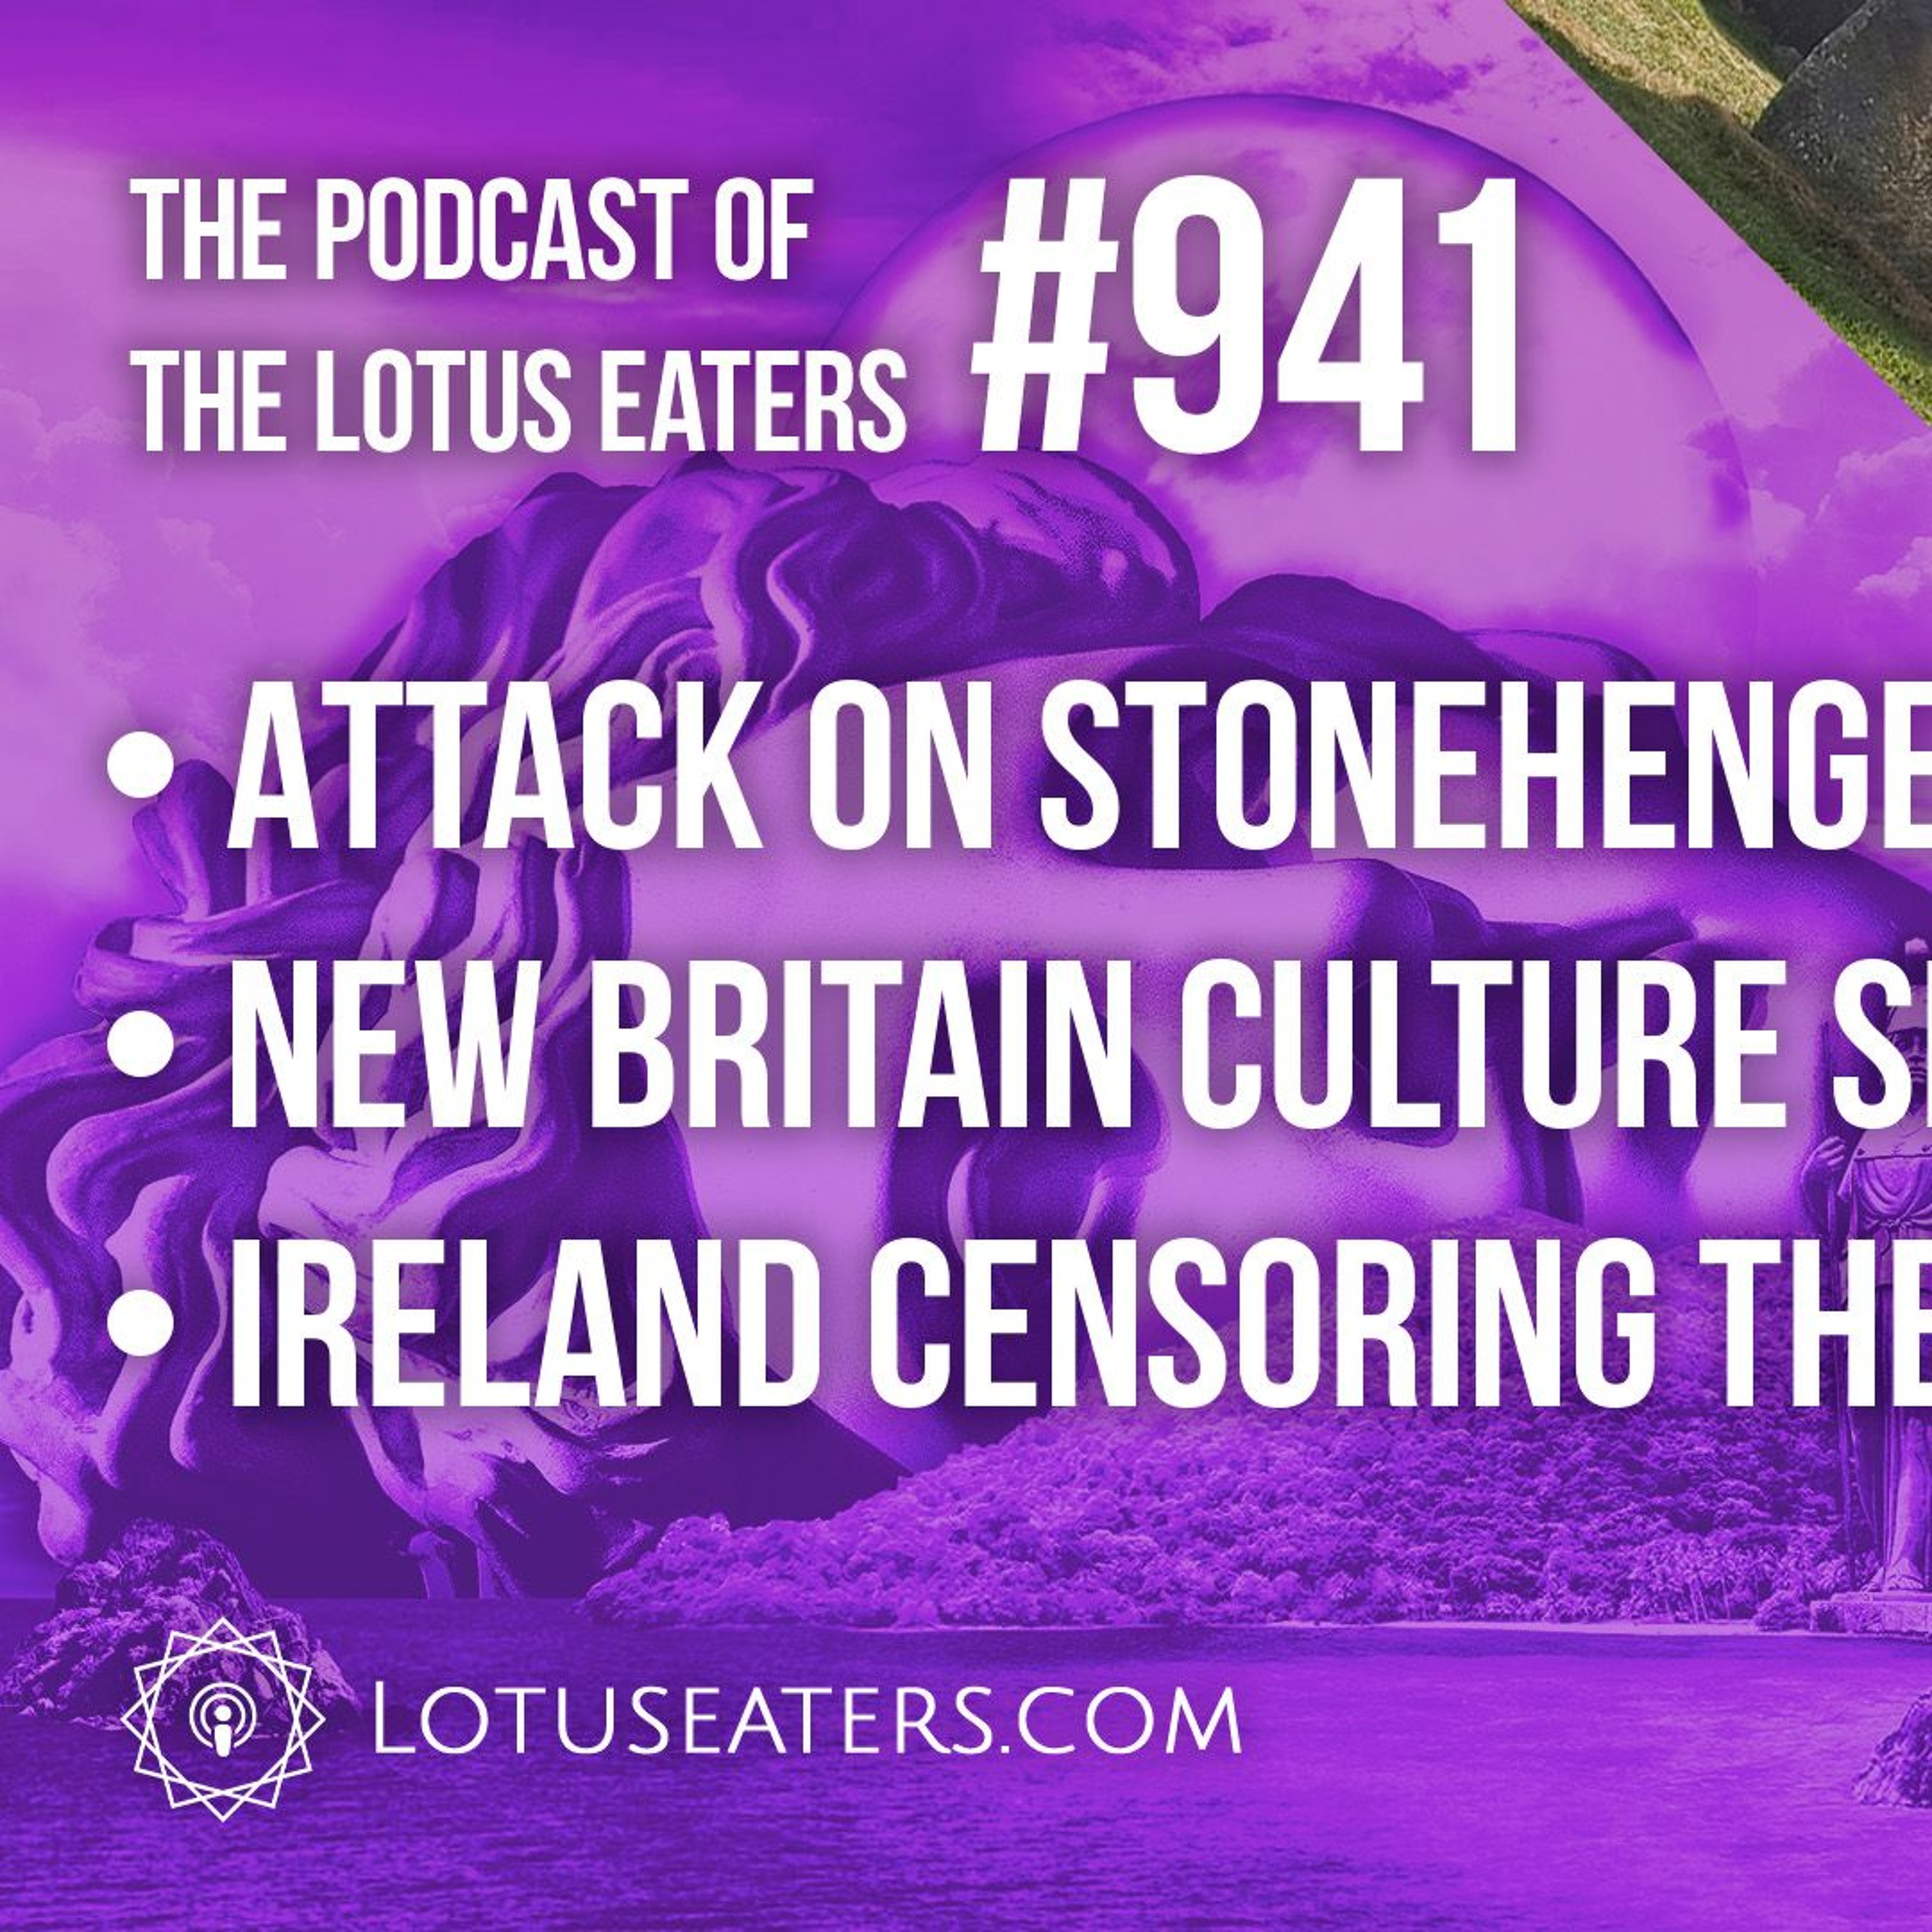 The Podcast of the Lotus Eaters #941